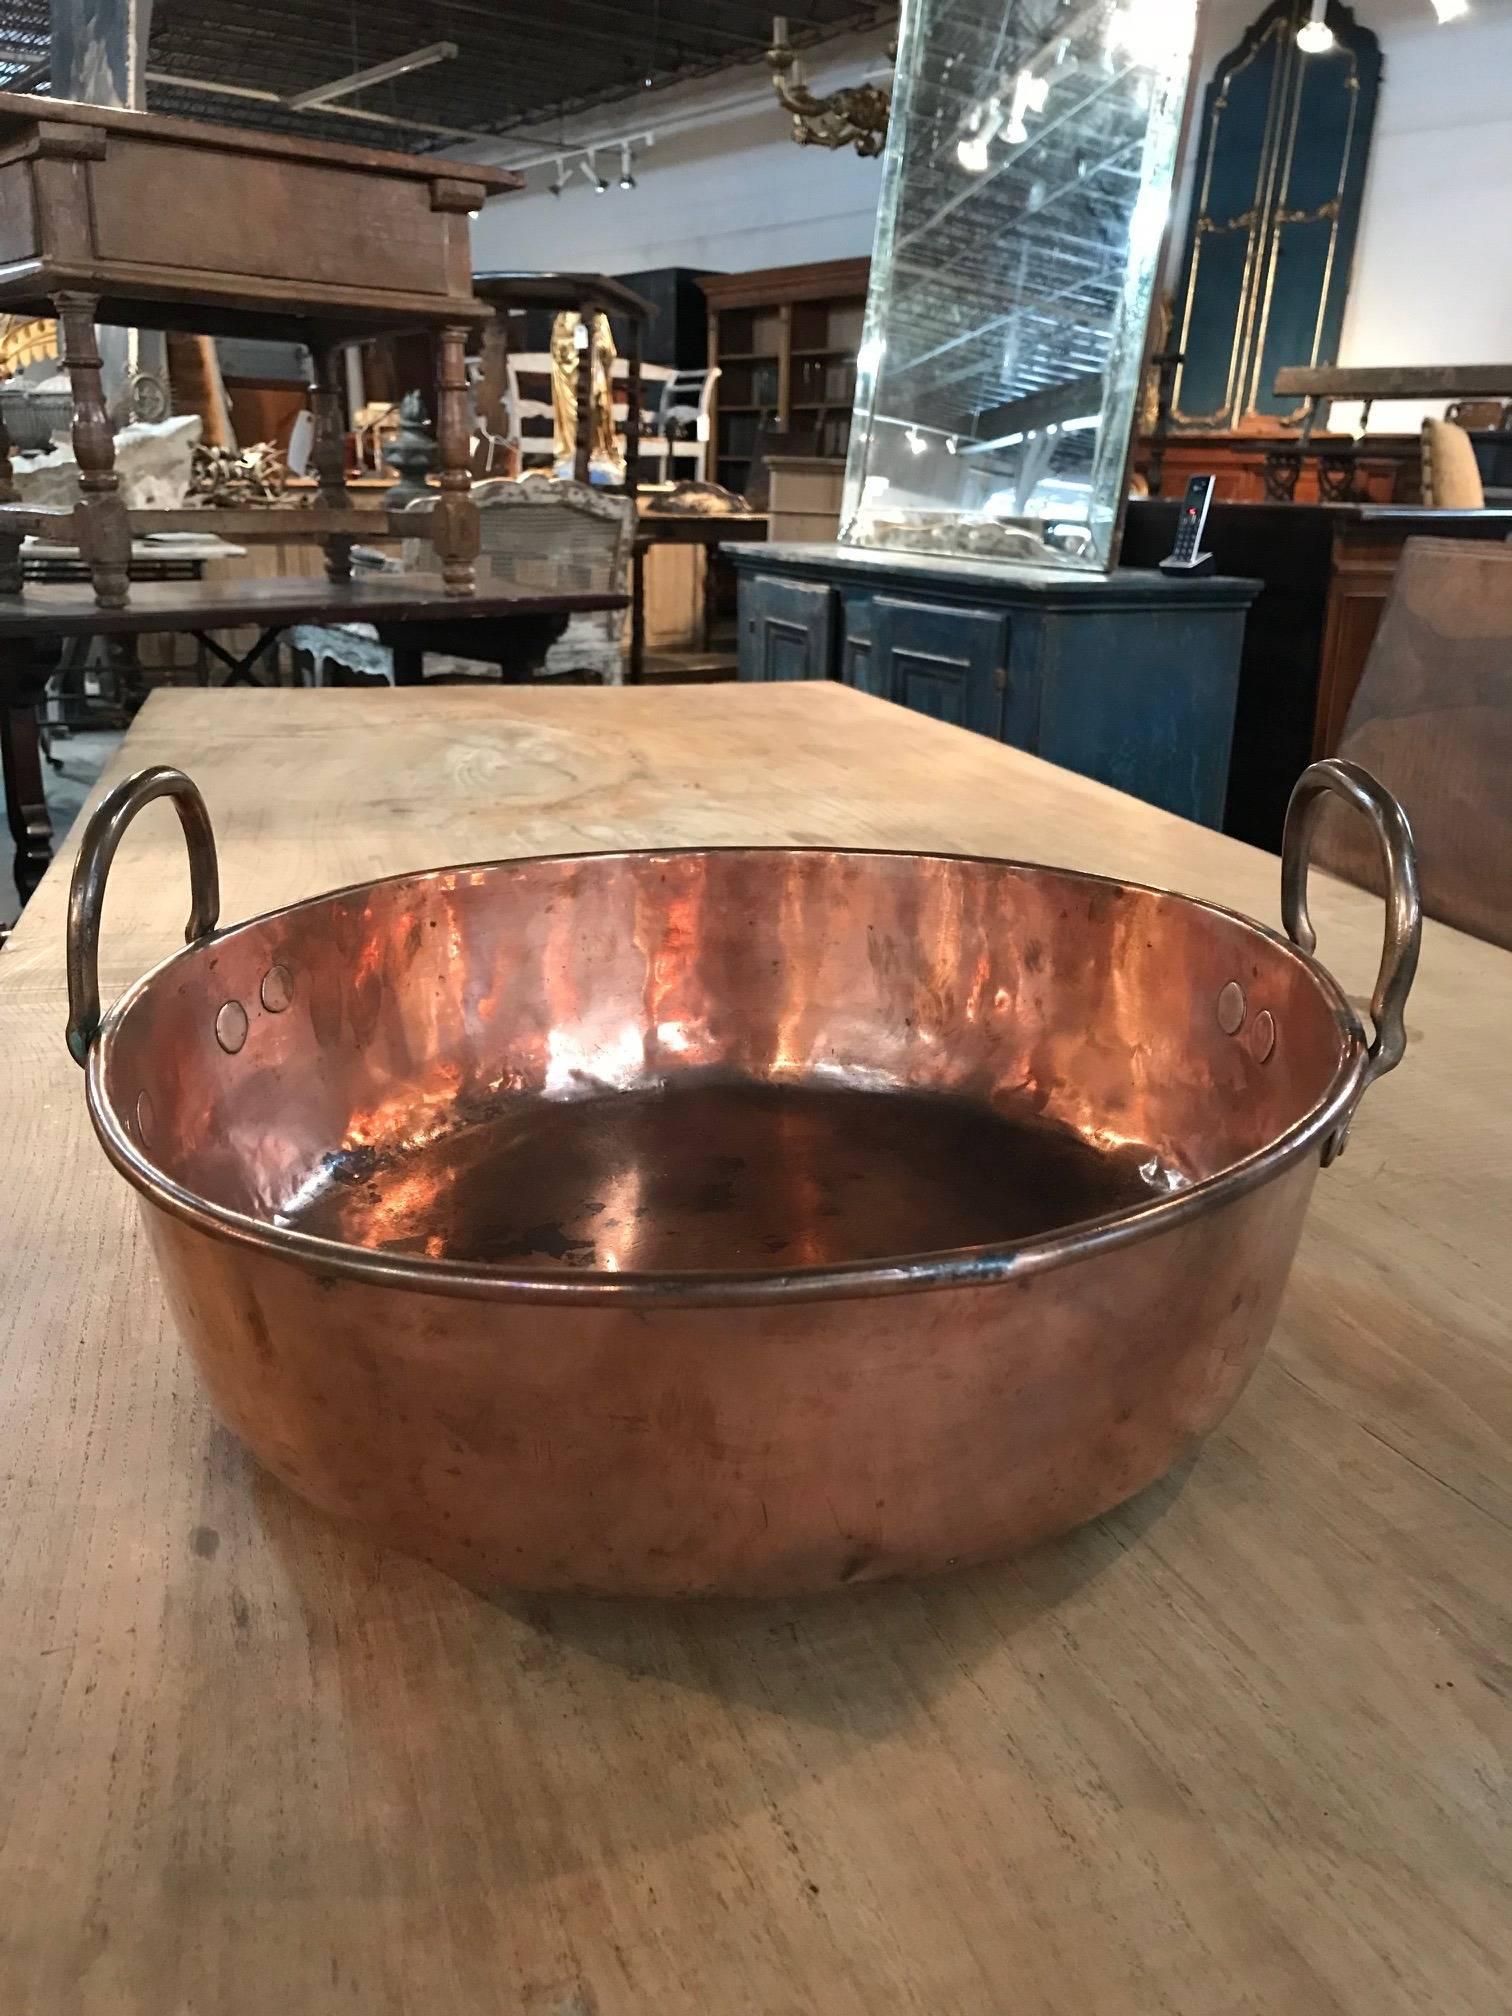 A charming French 18th century copper pan, copper ware with handles. A perfect accessory for the kitchen.